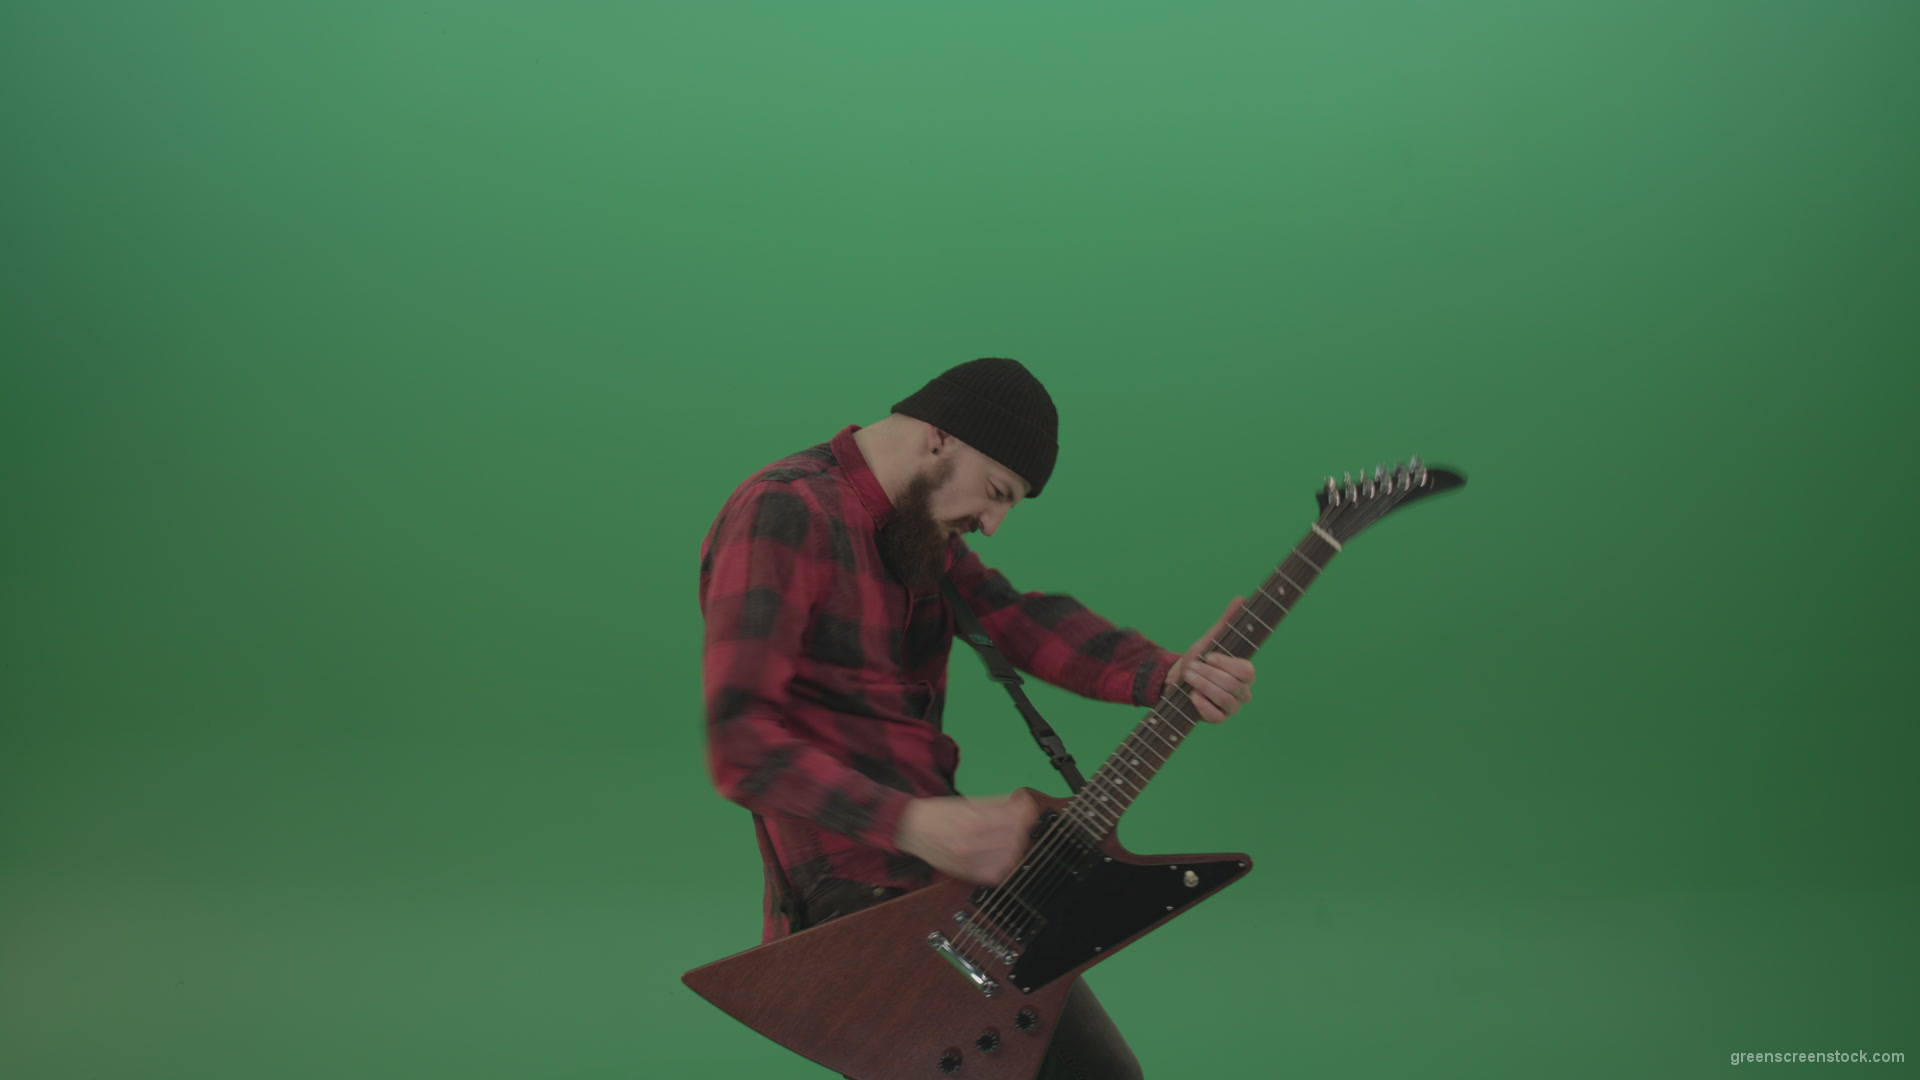 Young-man-with-beard-play-hardcore-music-on-guitar-in-side-view-on-green-screen-chromakey-background_009 Green Screen Stock